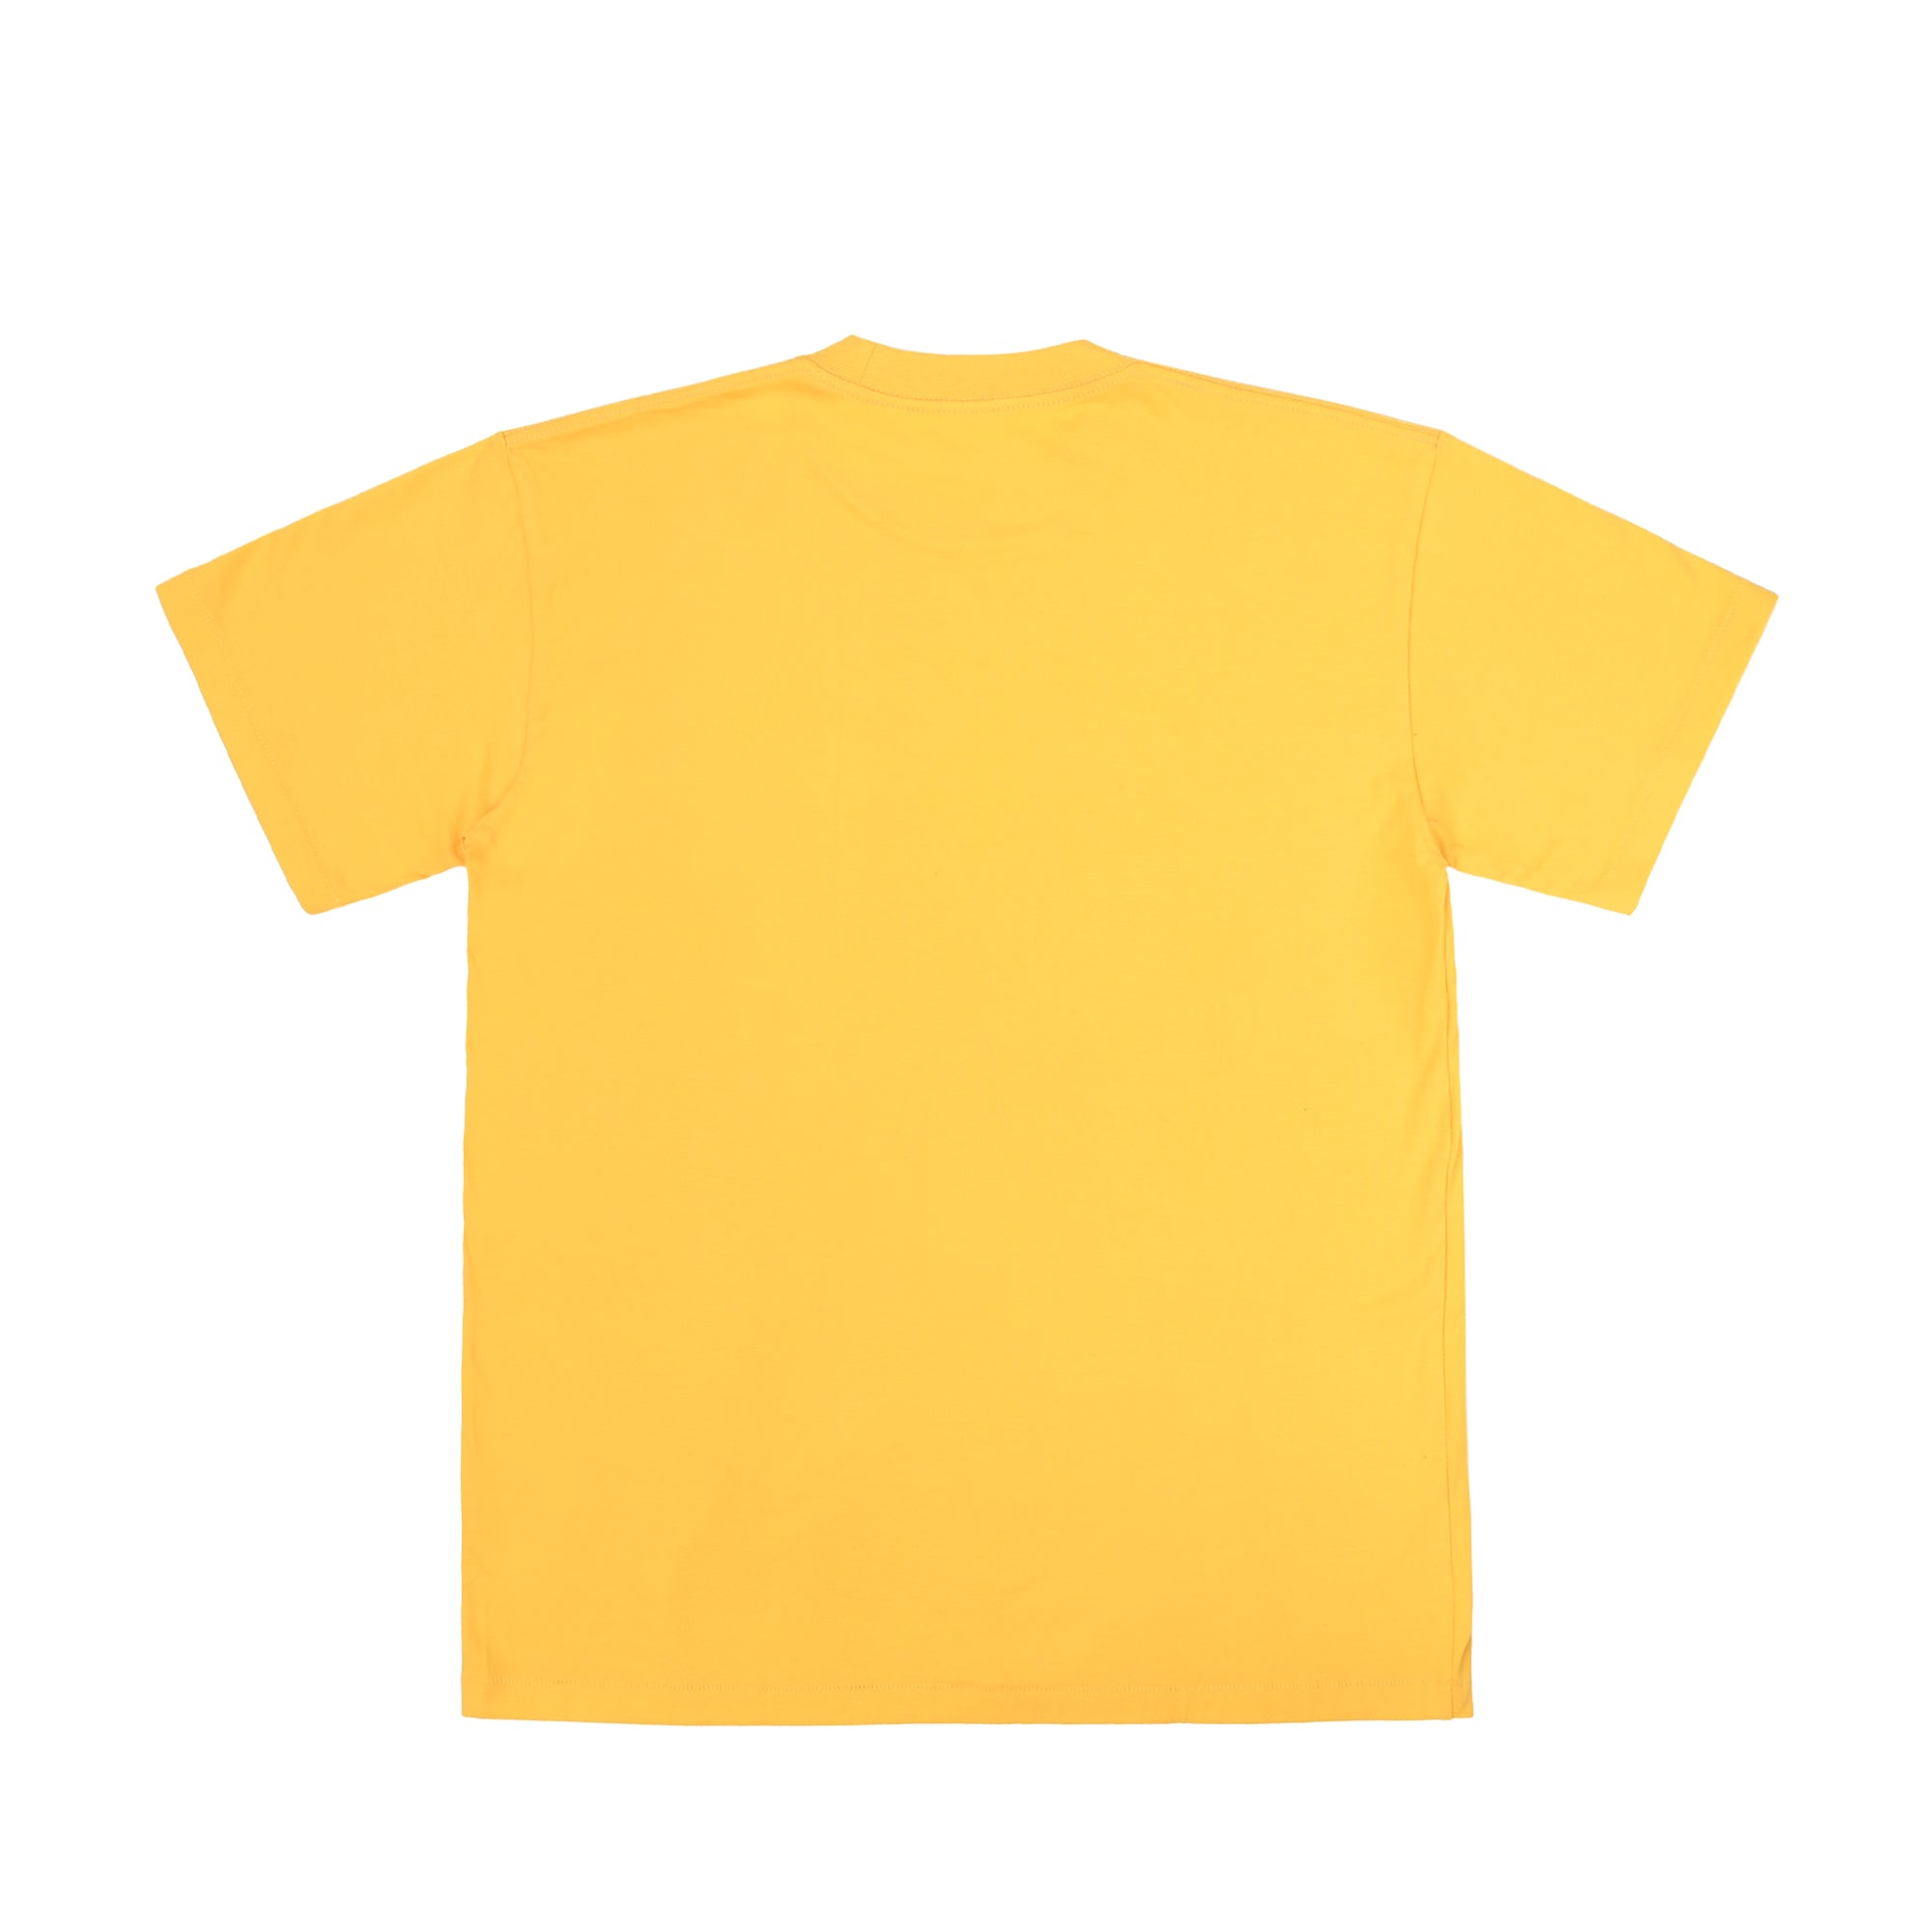 The Salvages 'Sublime' Dance Dad T-Shirt in Summer Yellow